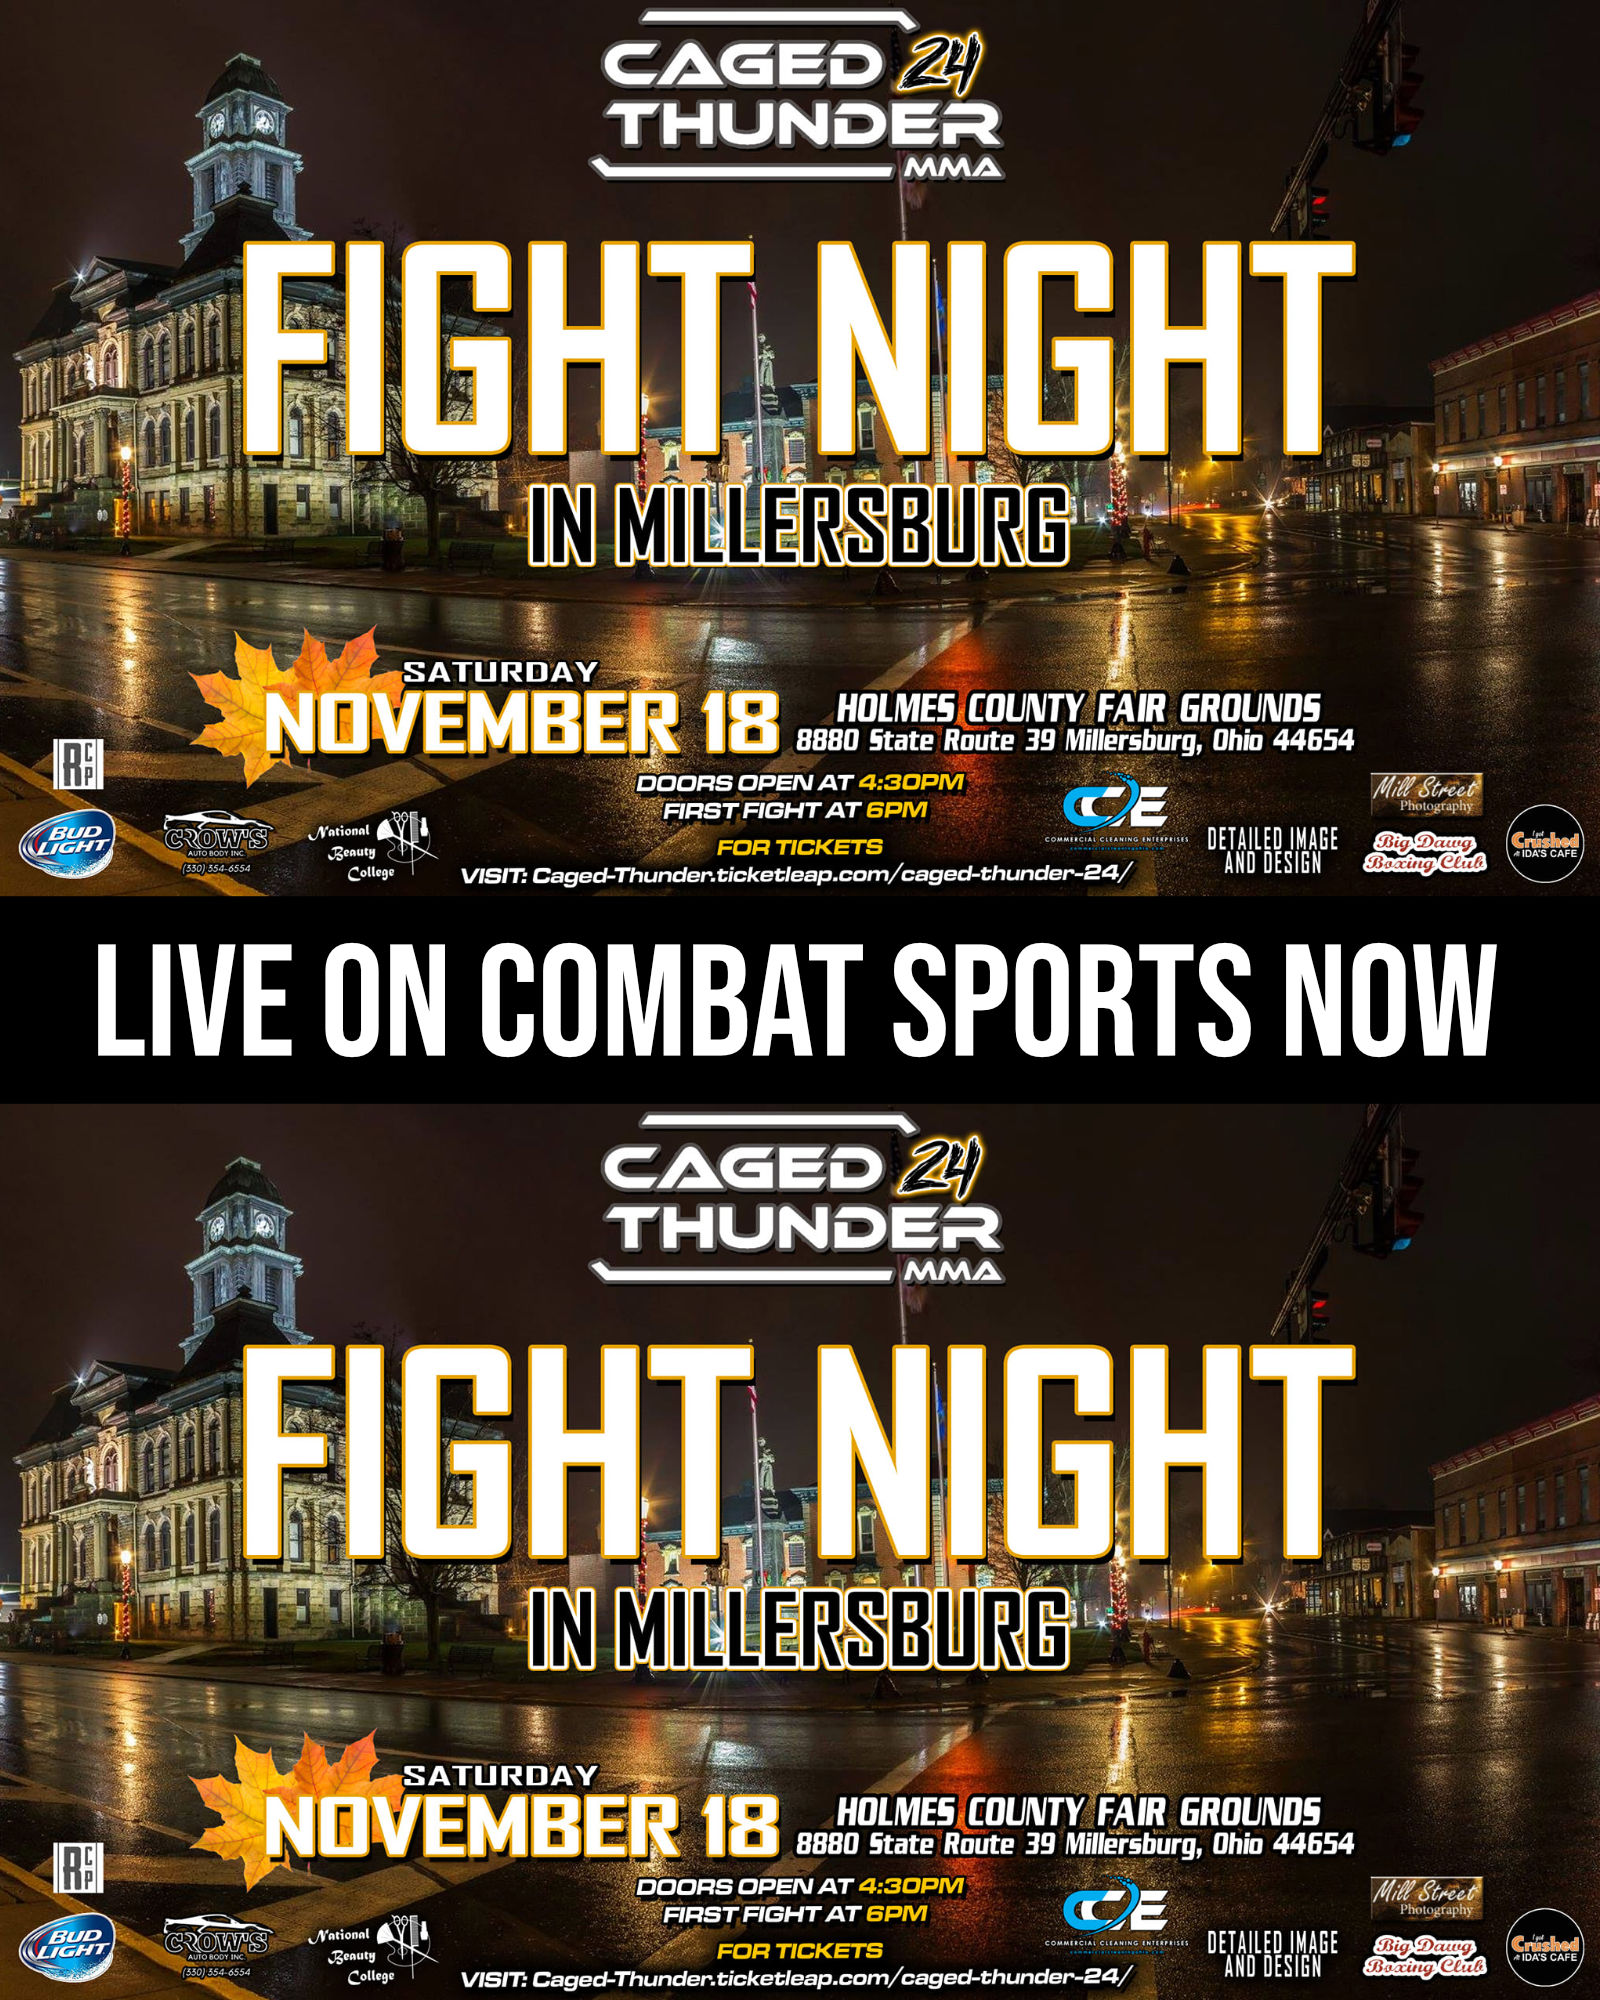 Watch Caged Thunder 24 Fight Night in Millersburg on Combat Sports Now